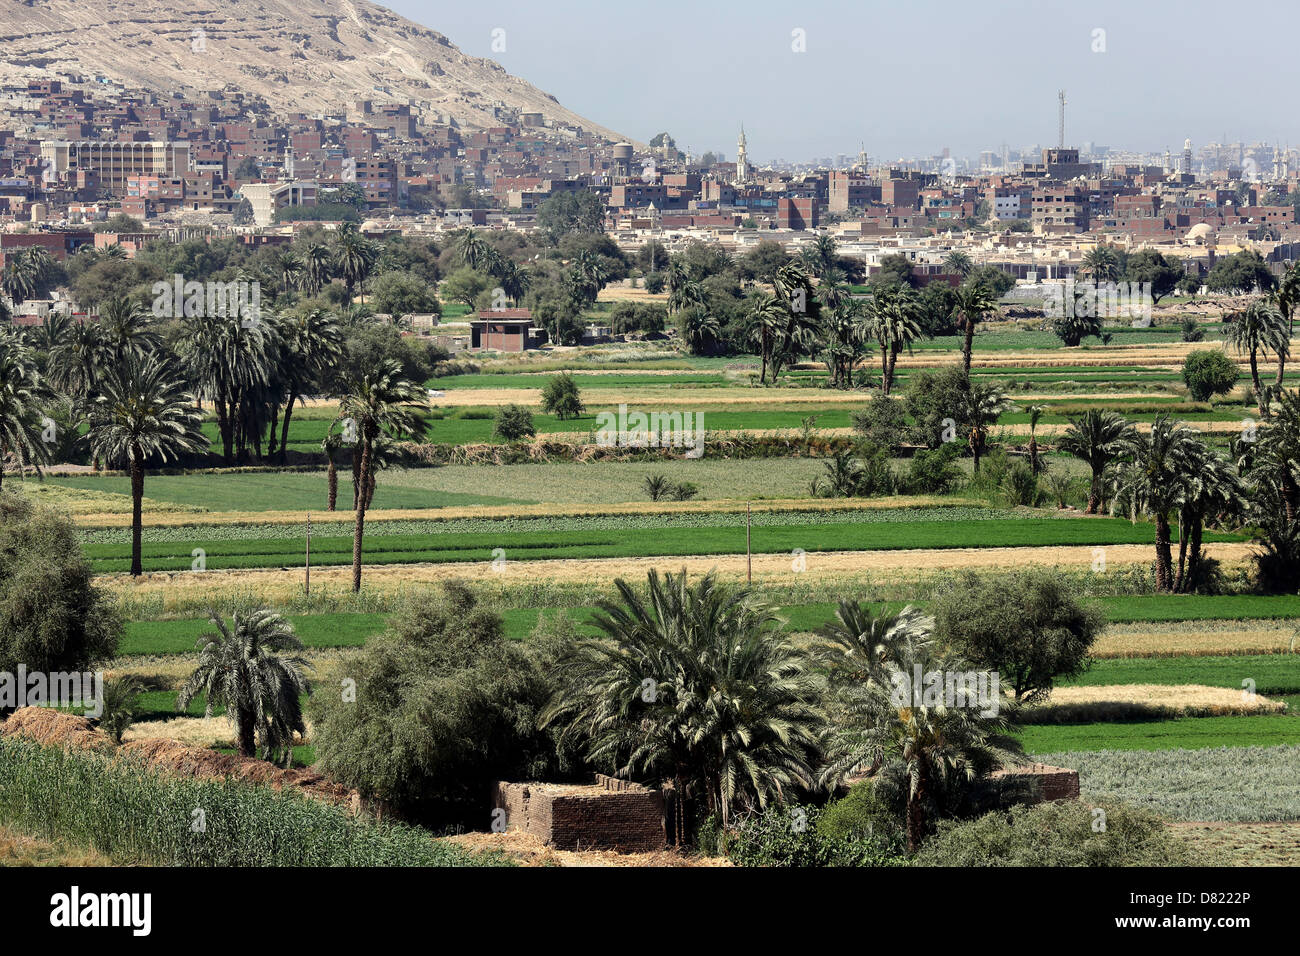 agriculture wheat fields surrounding the city of Assiut (background), Upper Egypt Stock Photo